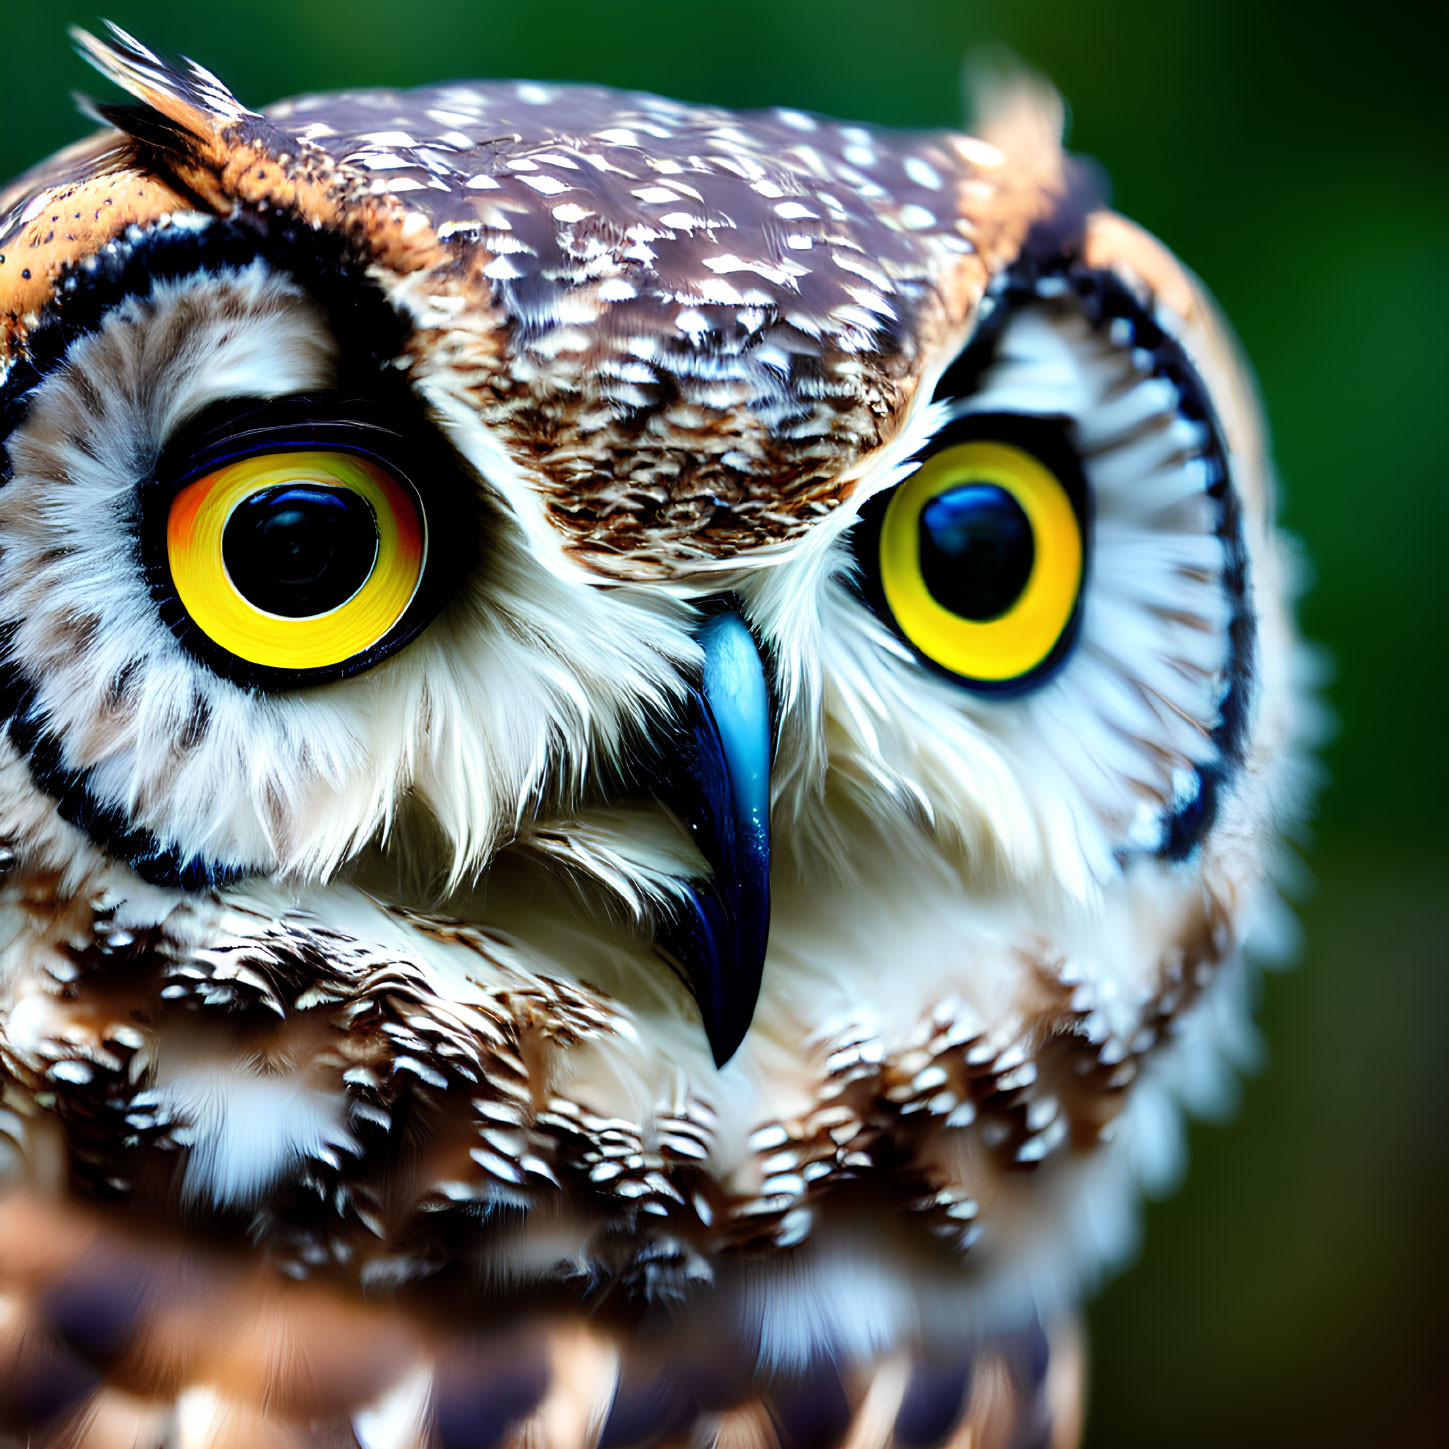 Detailed Close-up of Owl with Striking Yellow Eyes and Brown & White Feathers